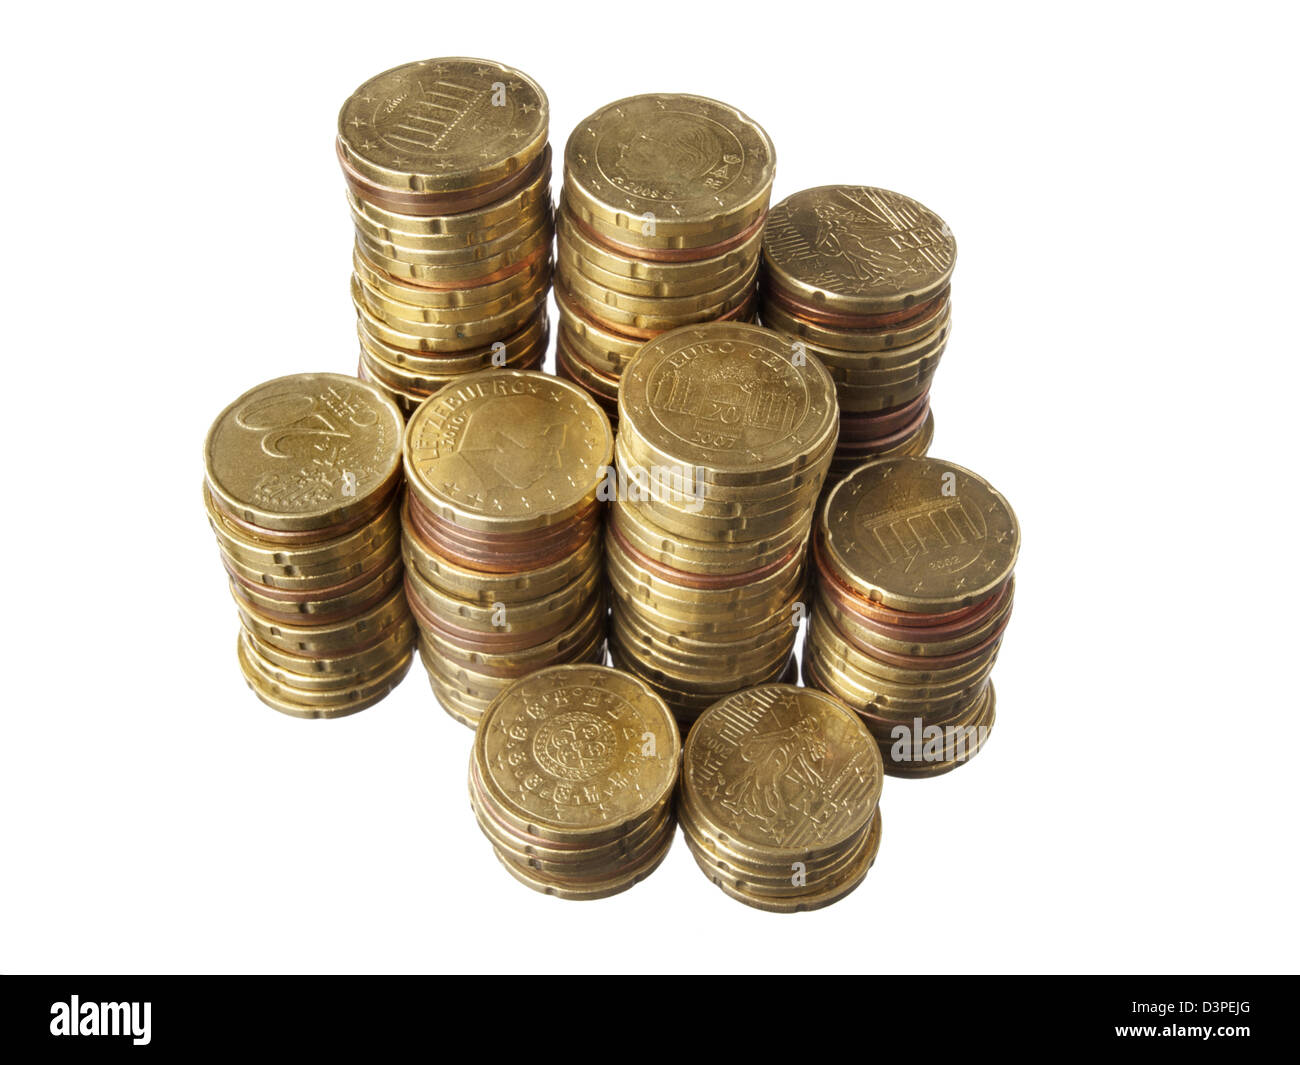 Small change, lots of Euro coins stacked, on white background. Stock Photo